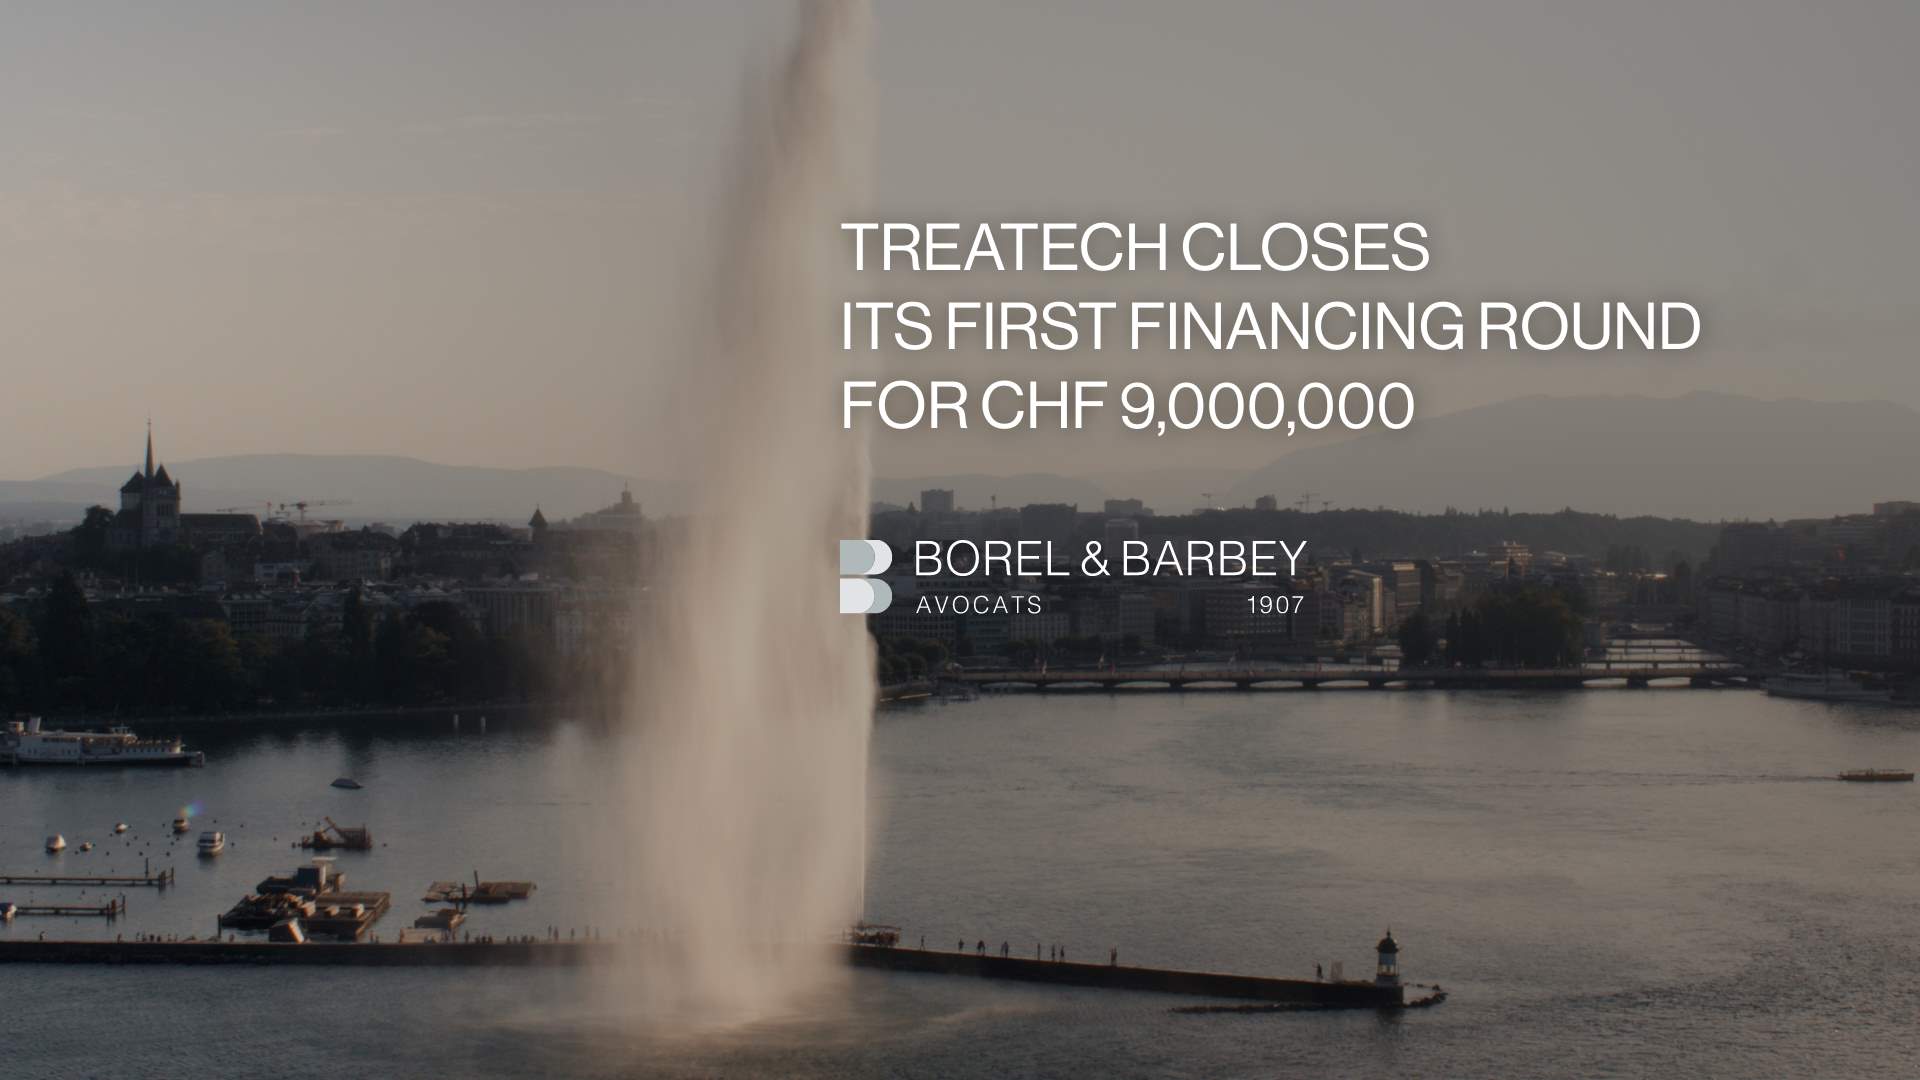 TreaTech closes its first financing round for CHF 9,000,000